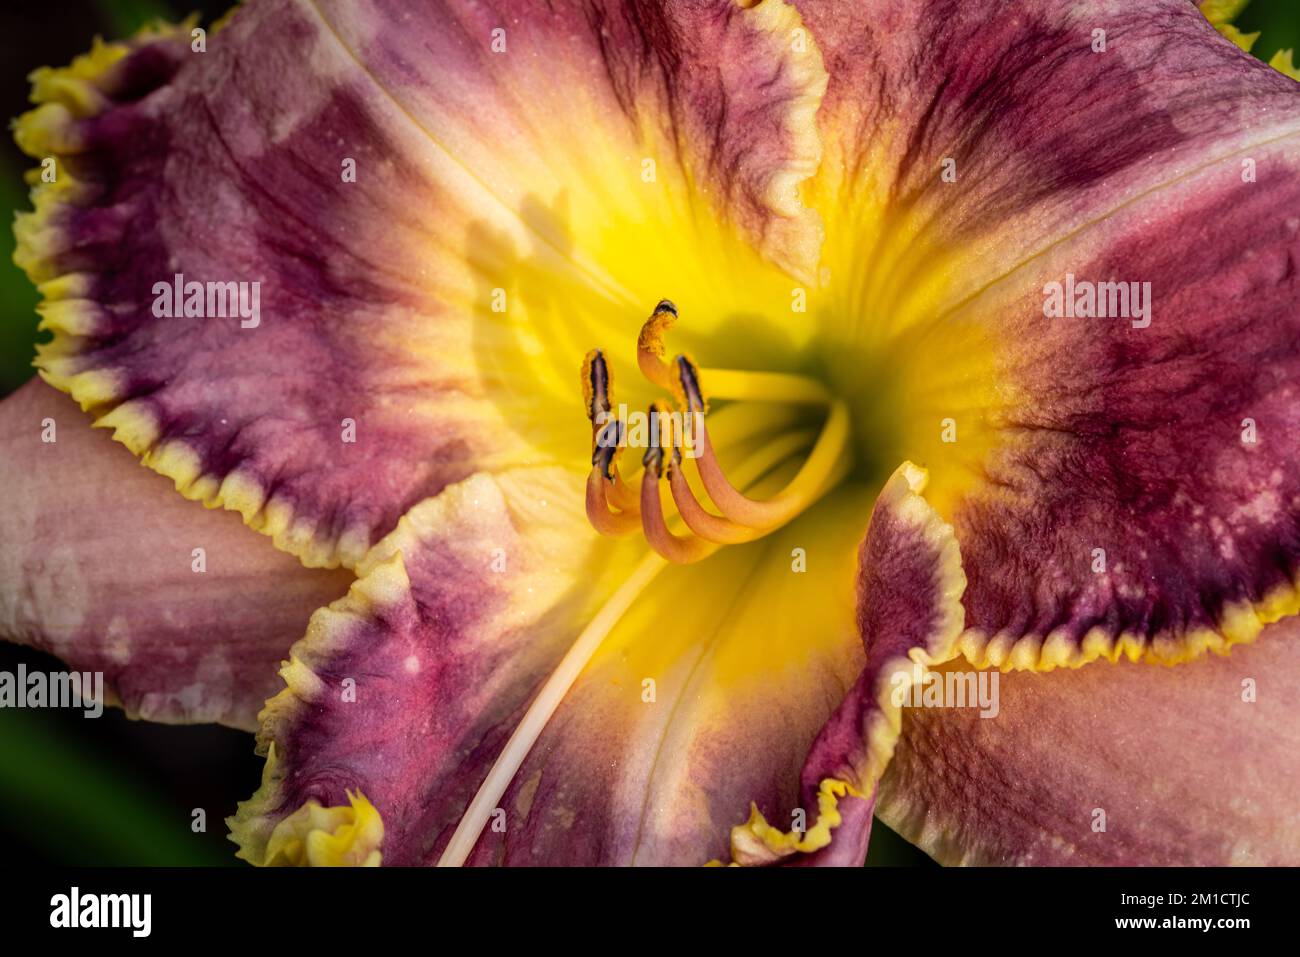 A closeup shot of the pistil of a clubhair mariposa lily flower in a garden Stock Photo